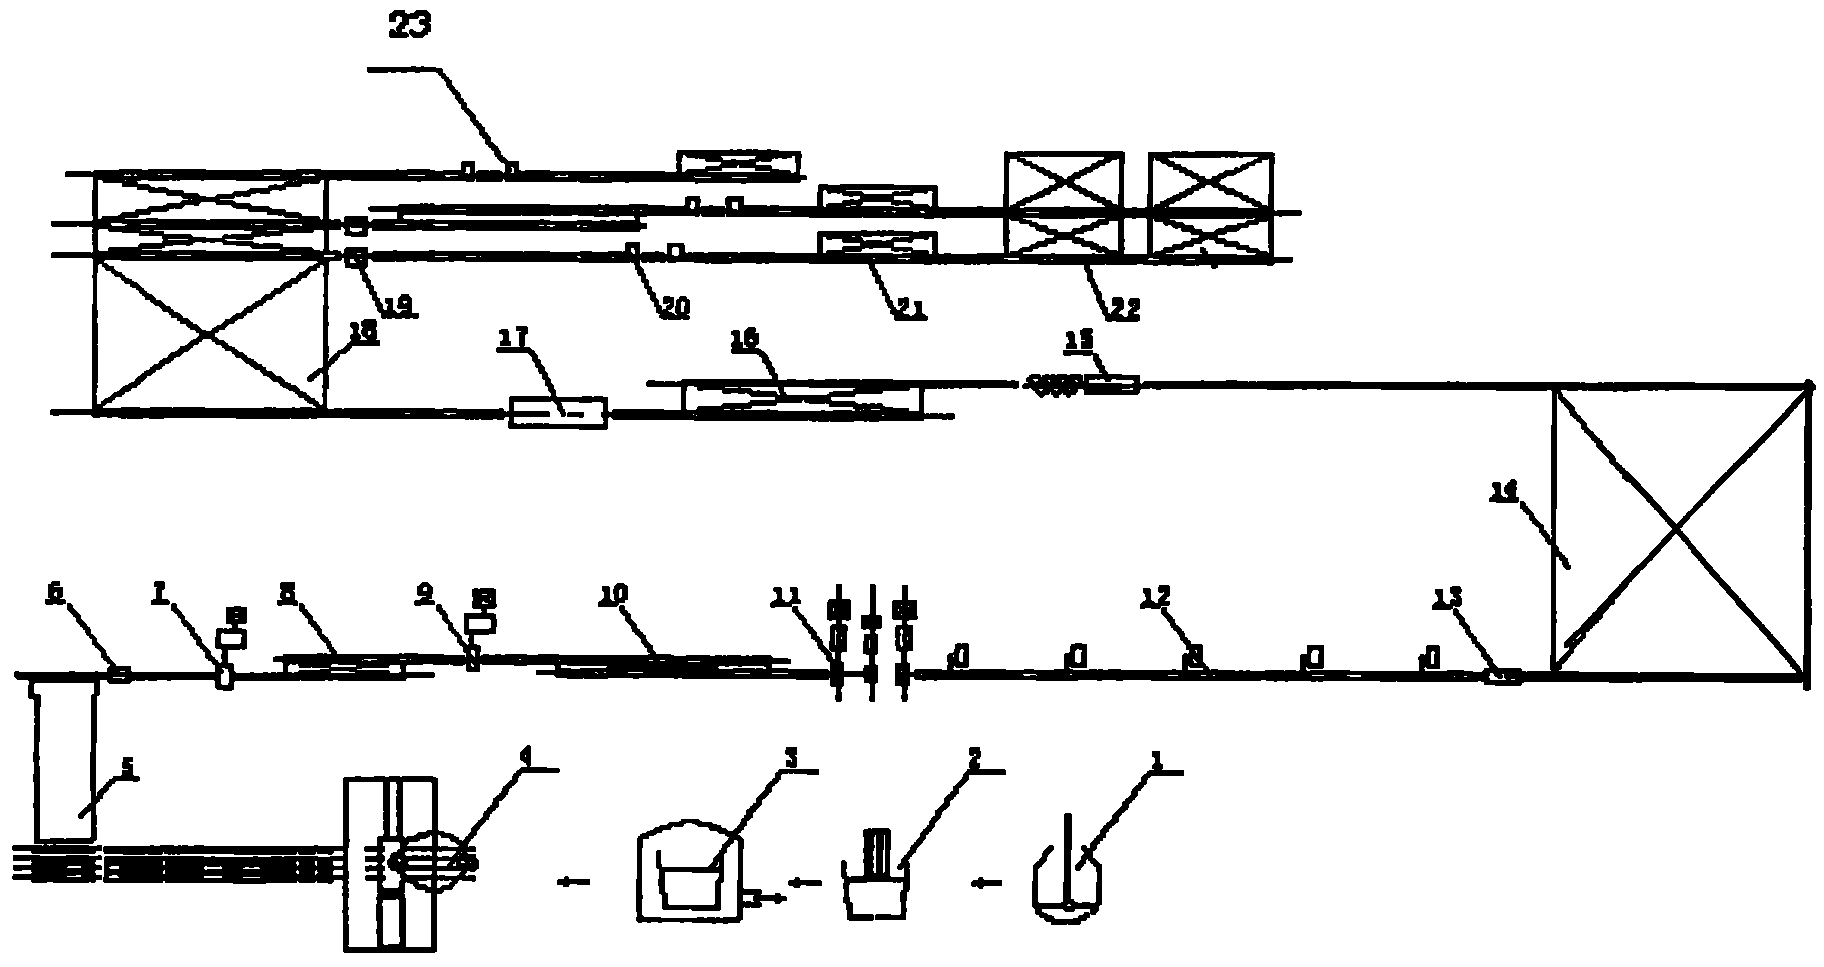 Short flow path manufacturing method of heavy rail